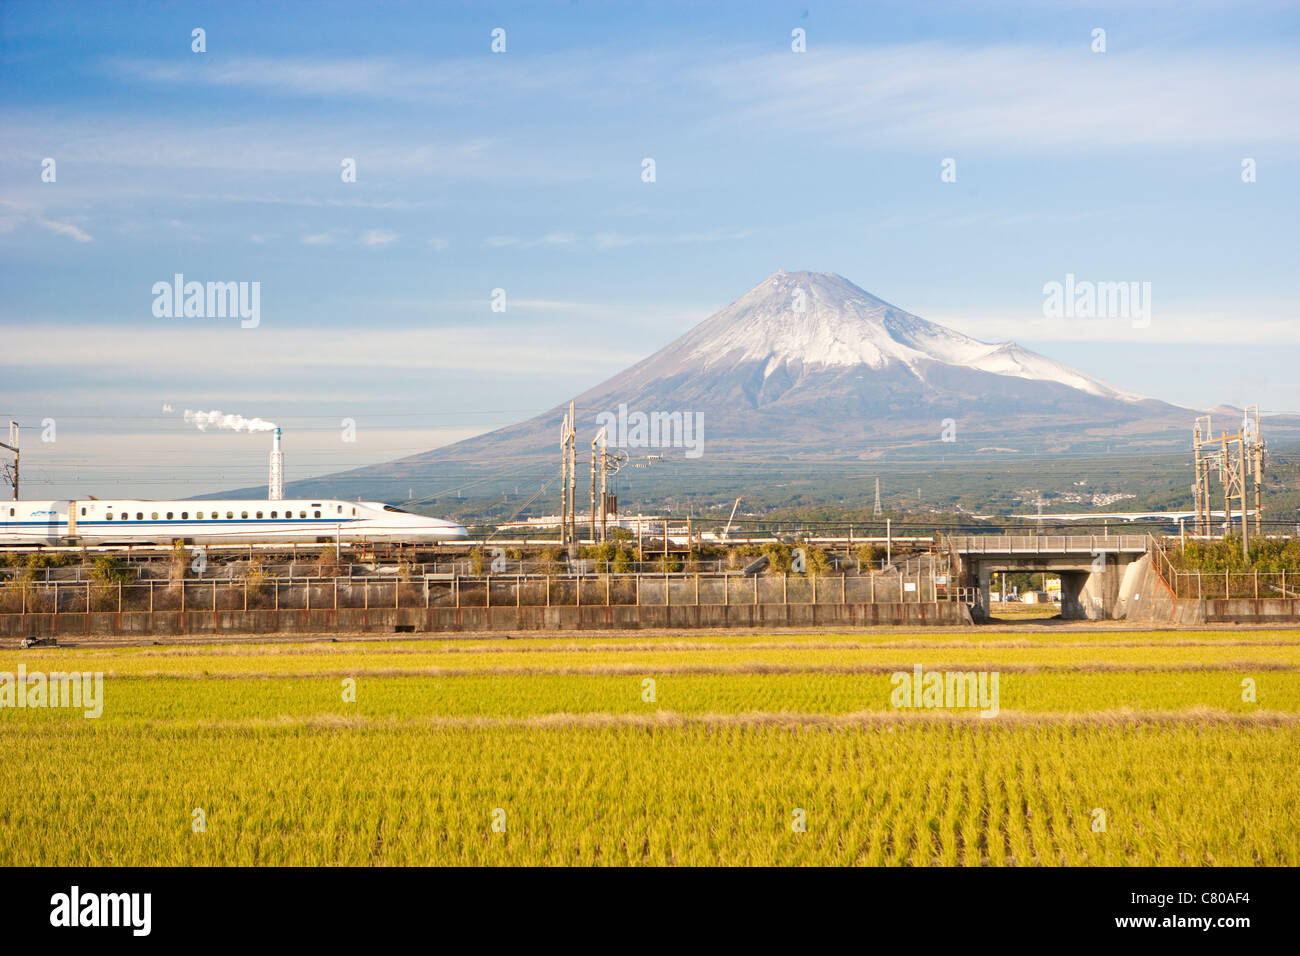 Bullet Train passing by Rice Field and Mount Fuji Stock Photo